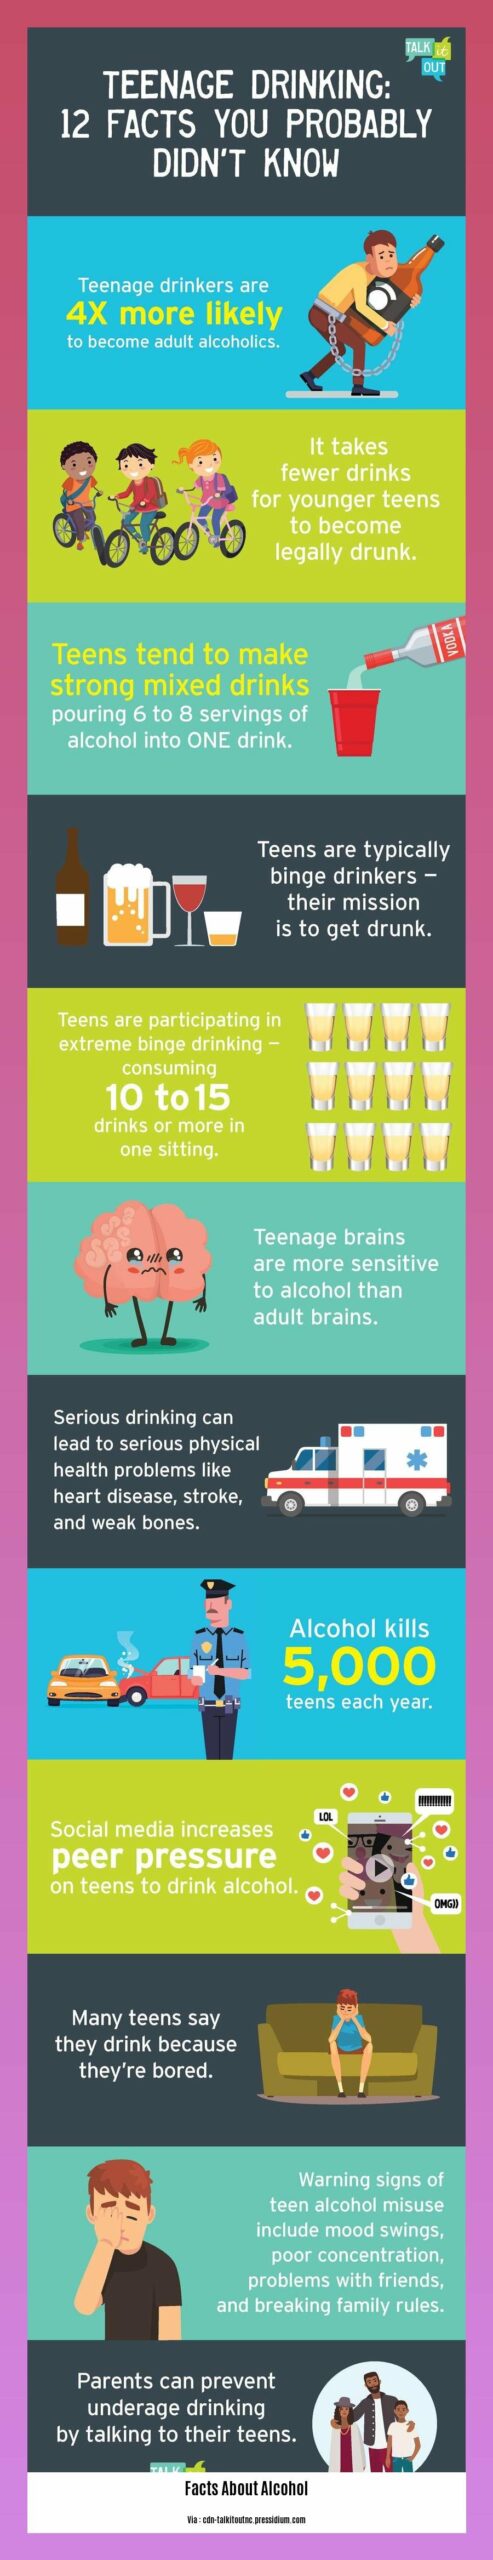 10 facts about alcohol